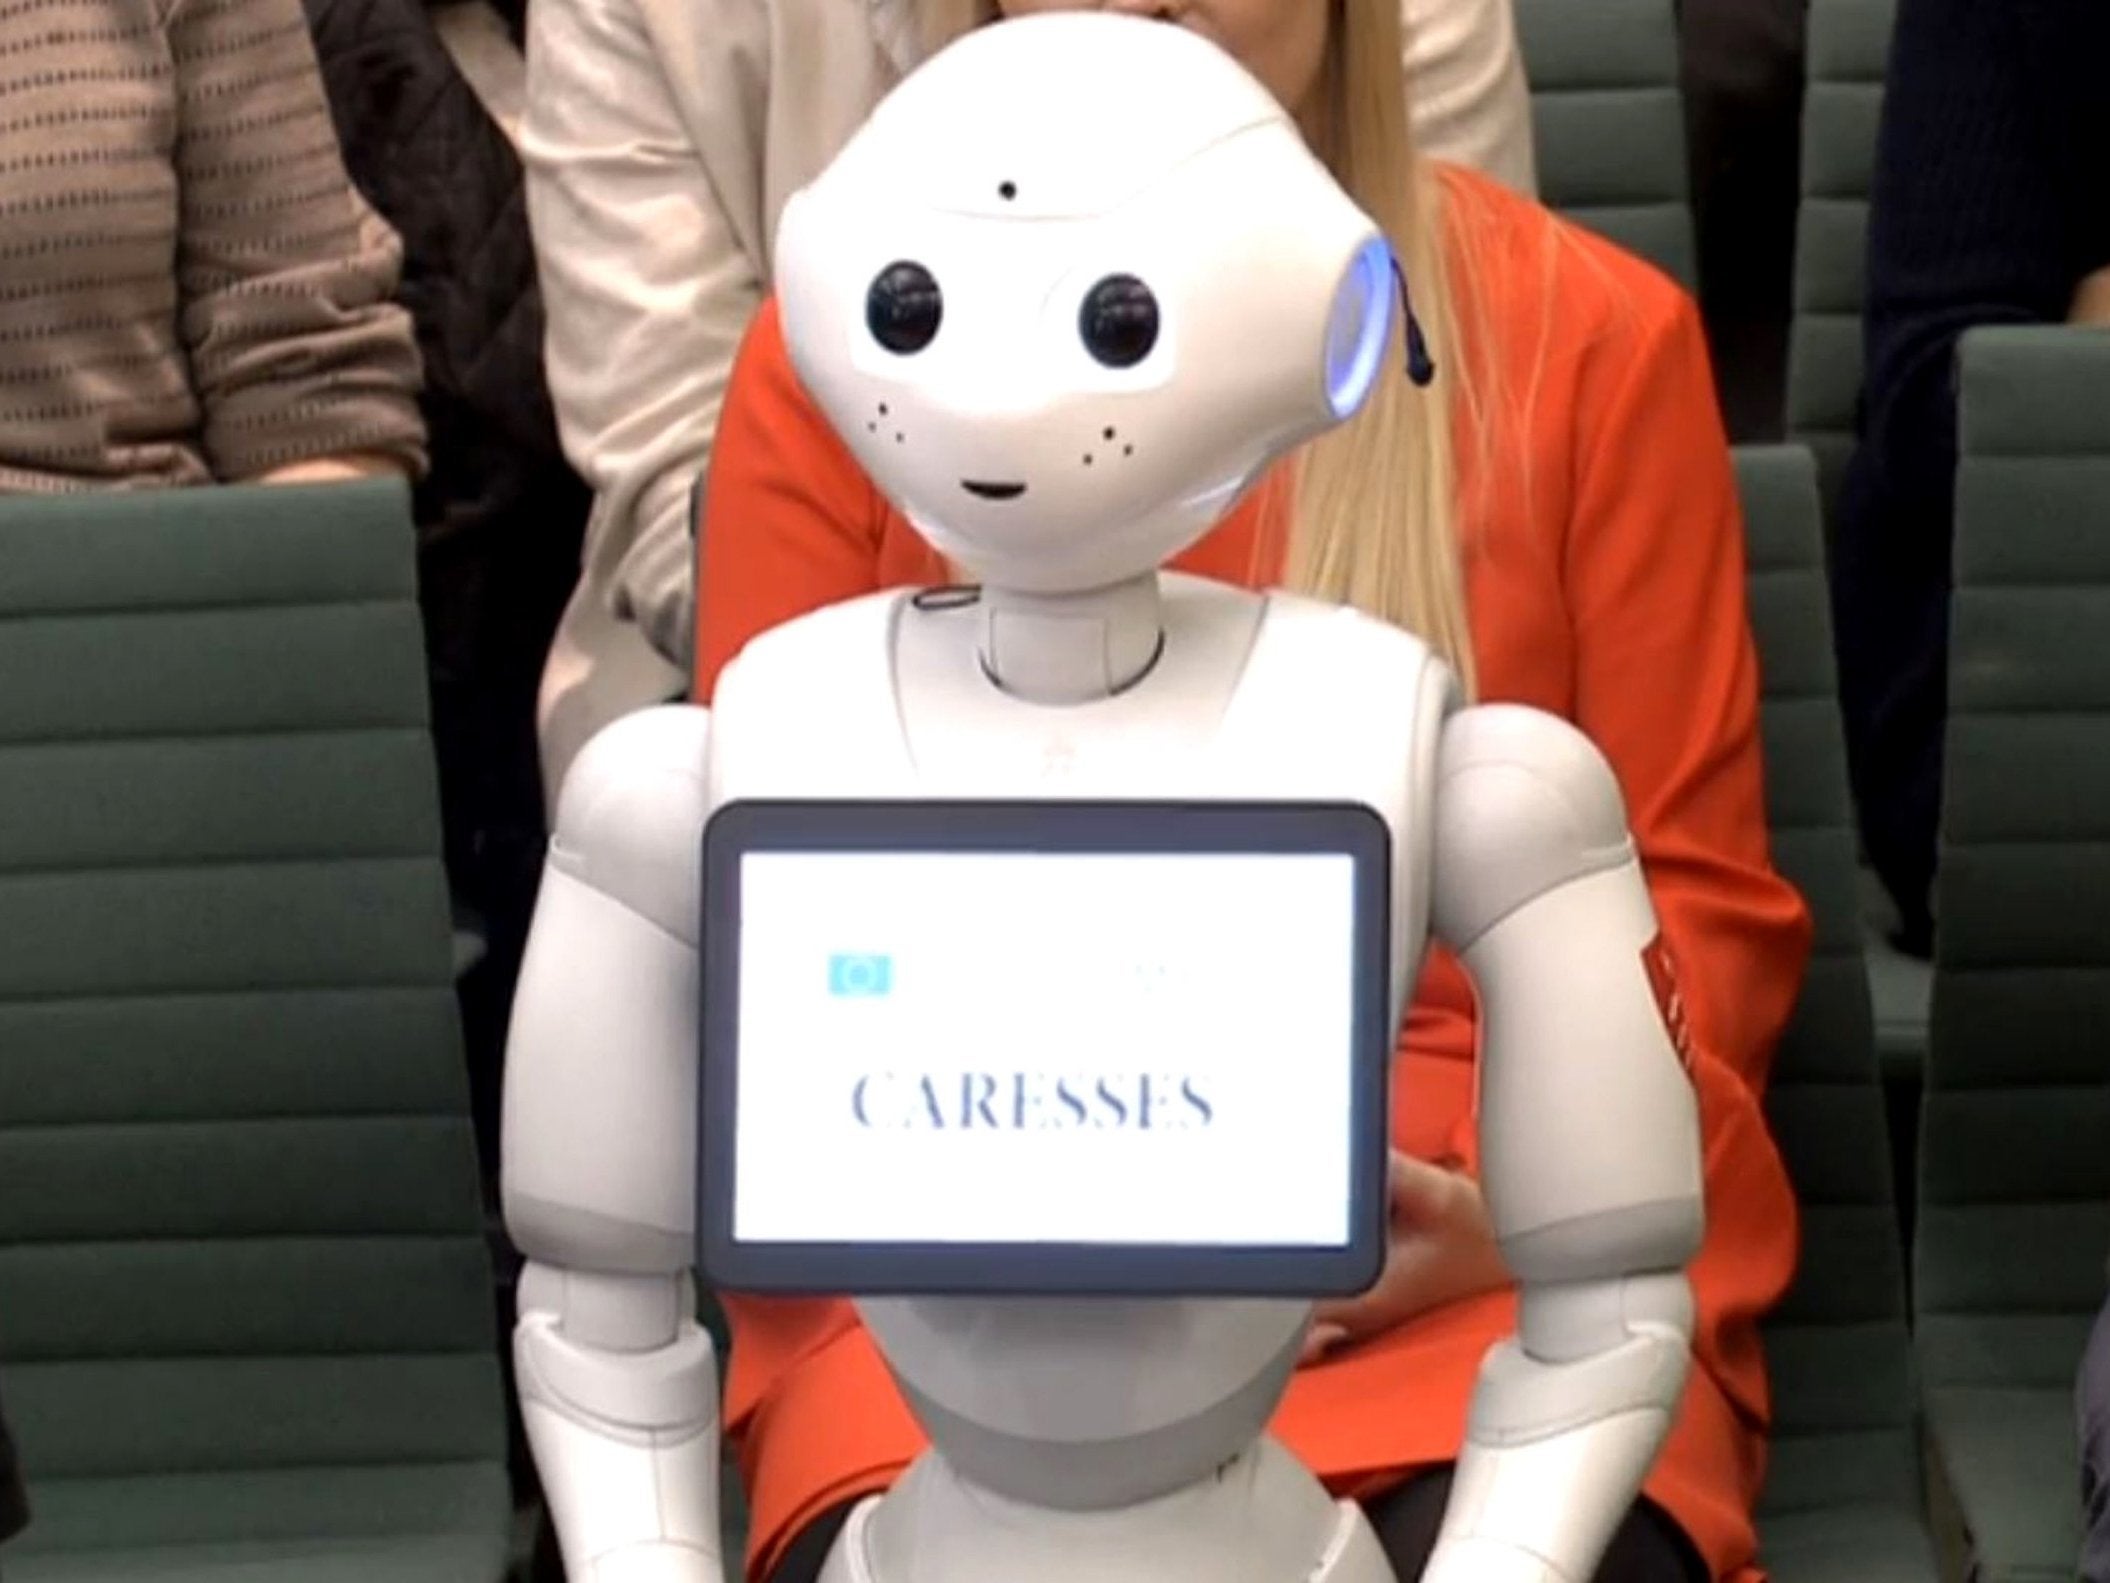 Pepper was the first AI robot to give evidence to parliament